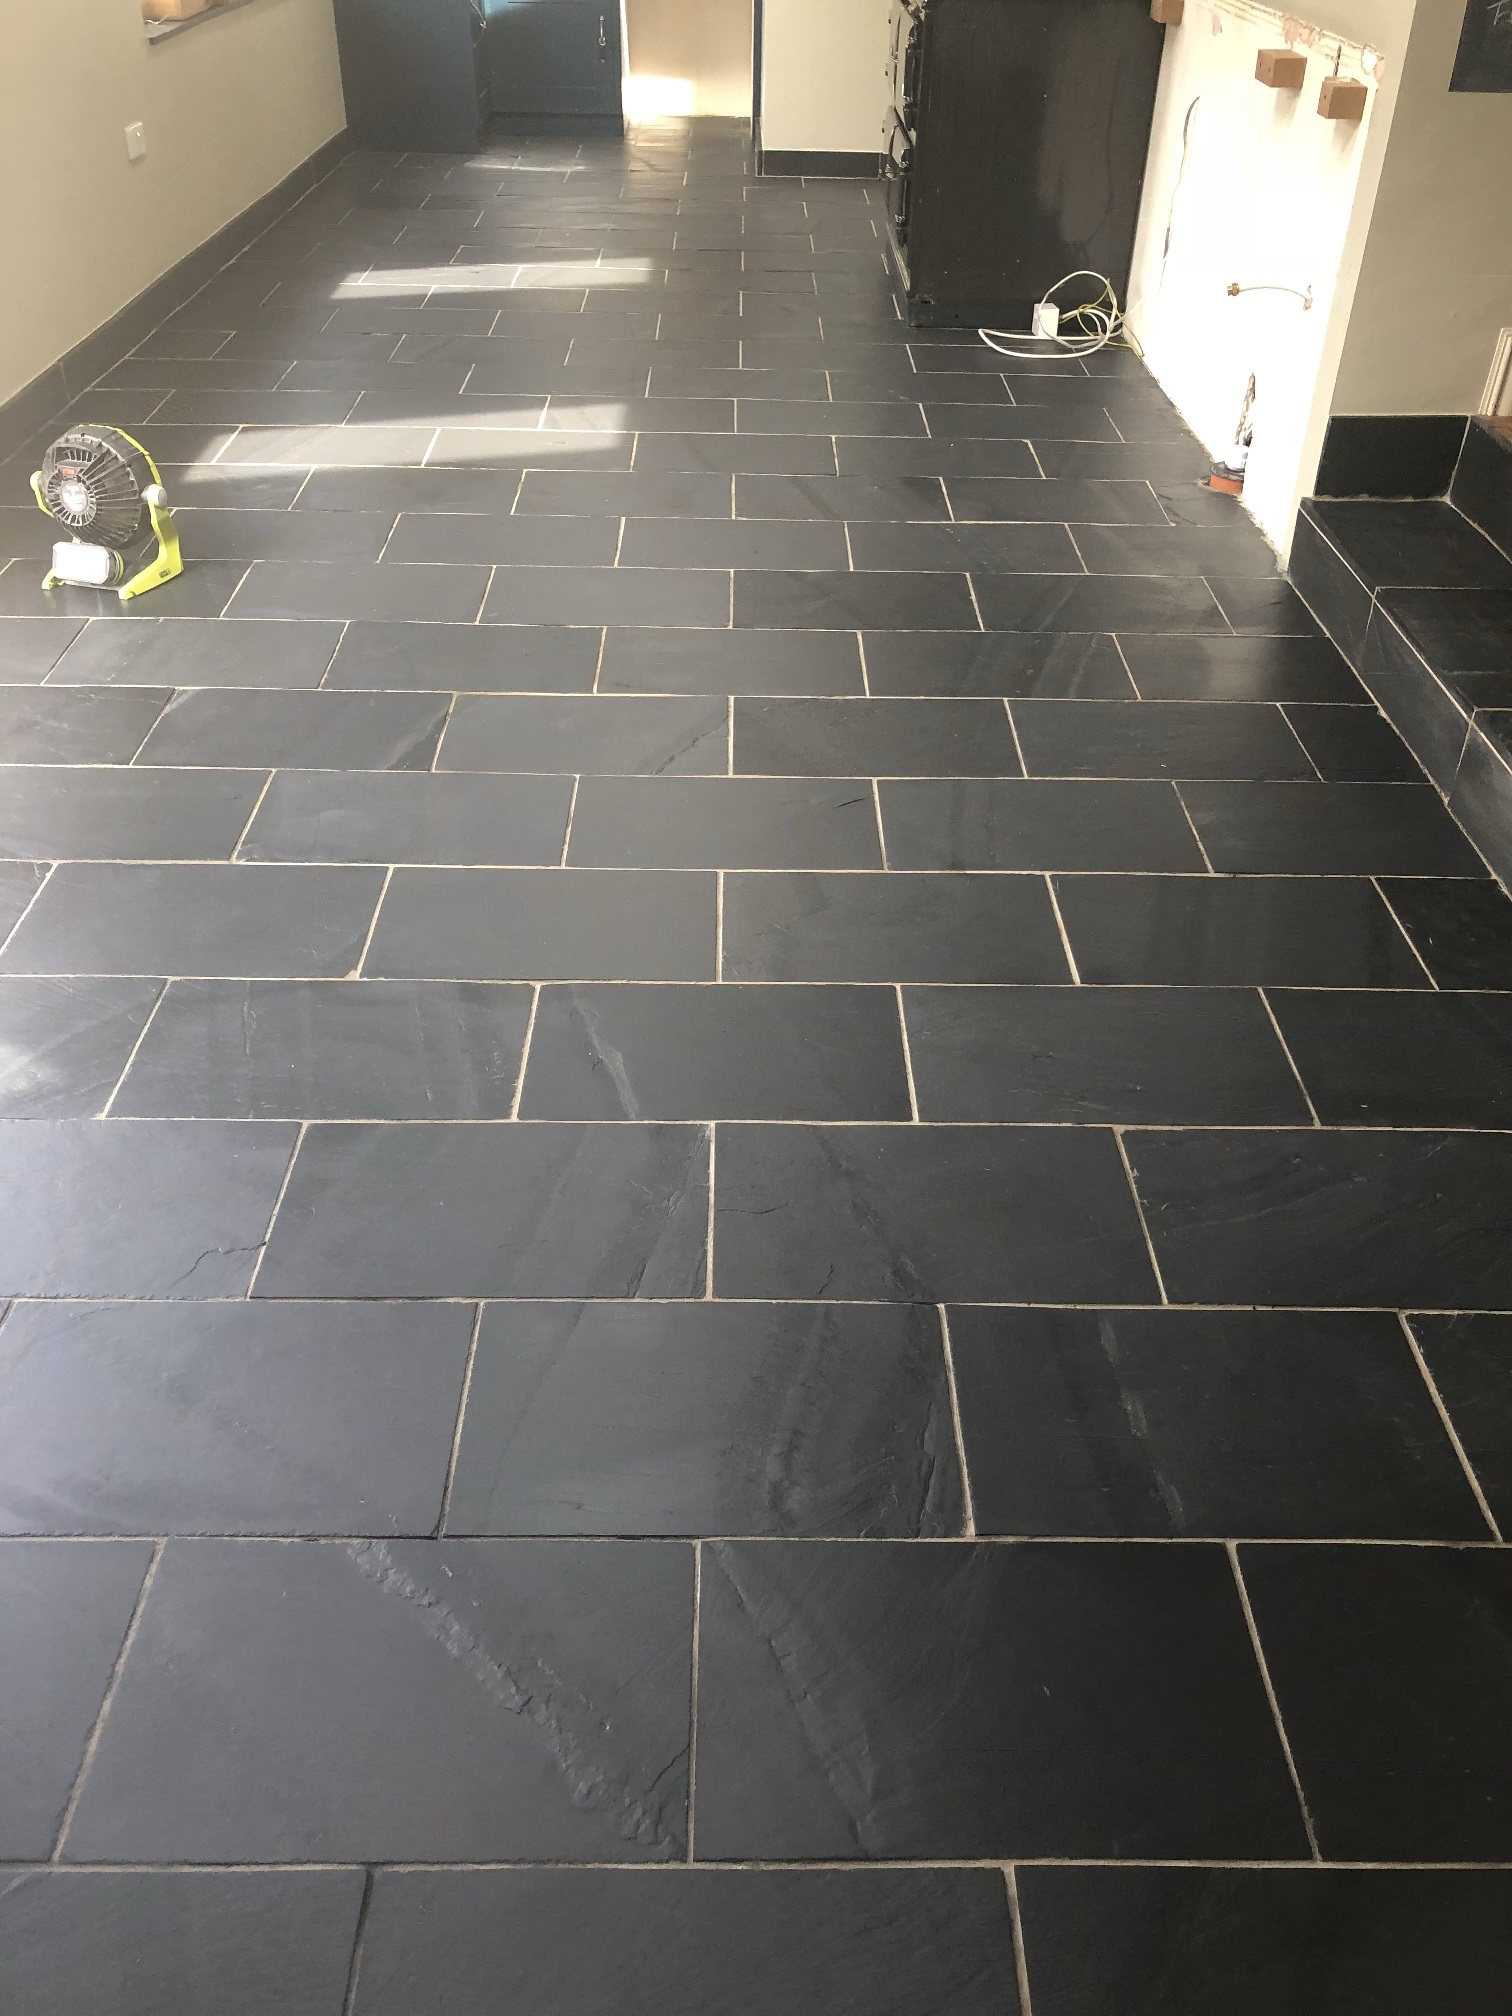 Slate Posts | Stone Cleaning and Polishing tips for Slate floors ...